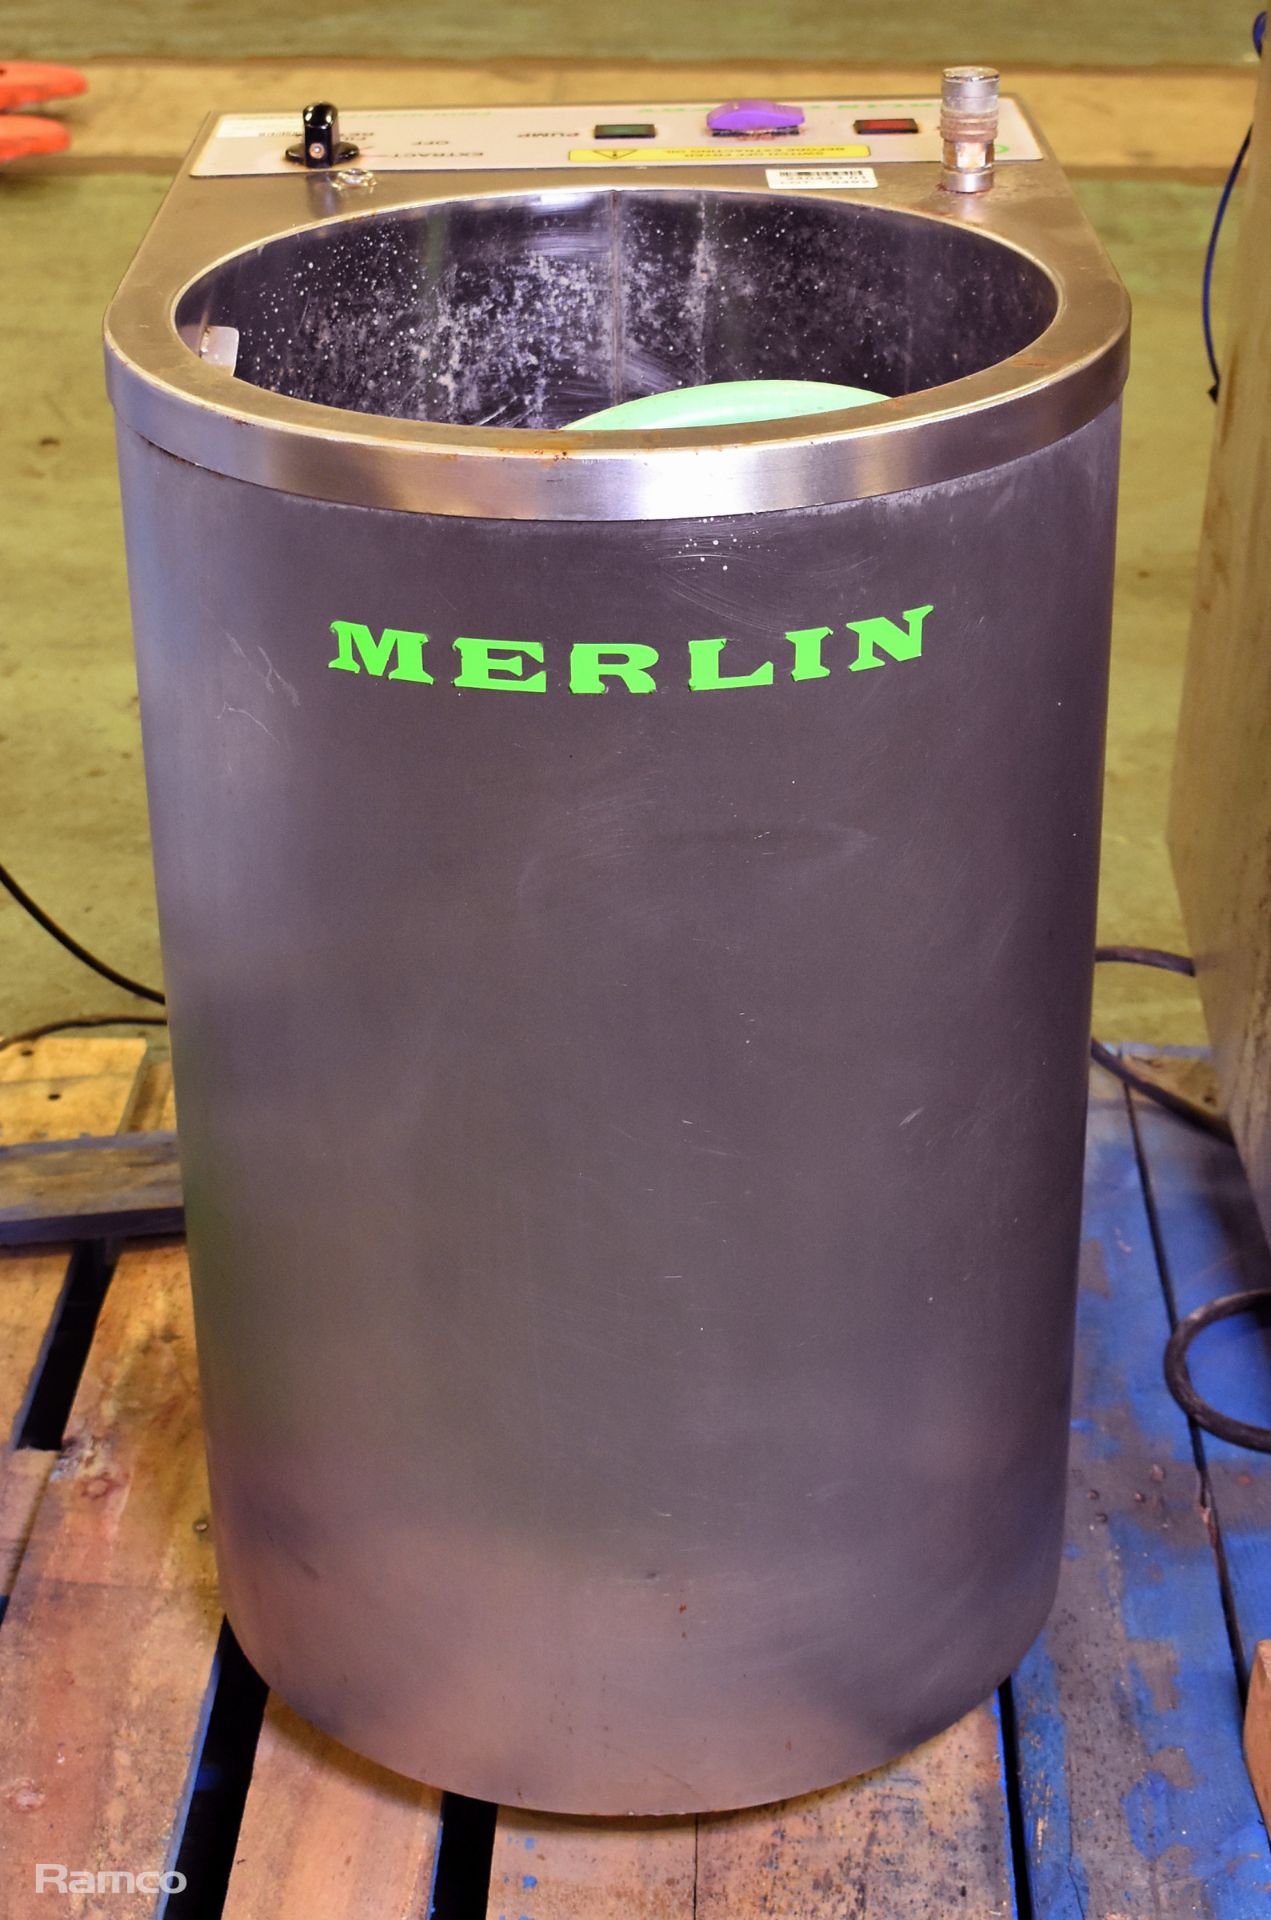 Merlin Filtration Top Fry stainless steel oil fat filter machine